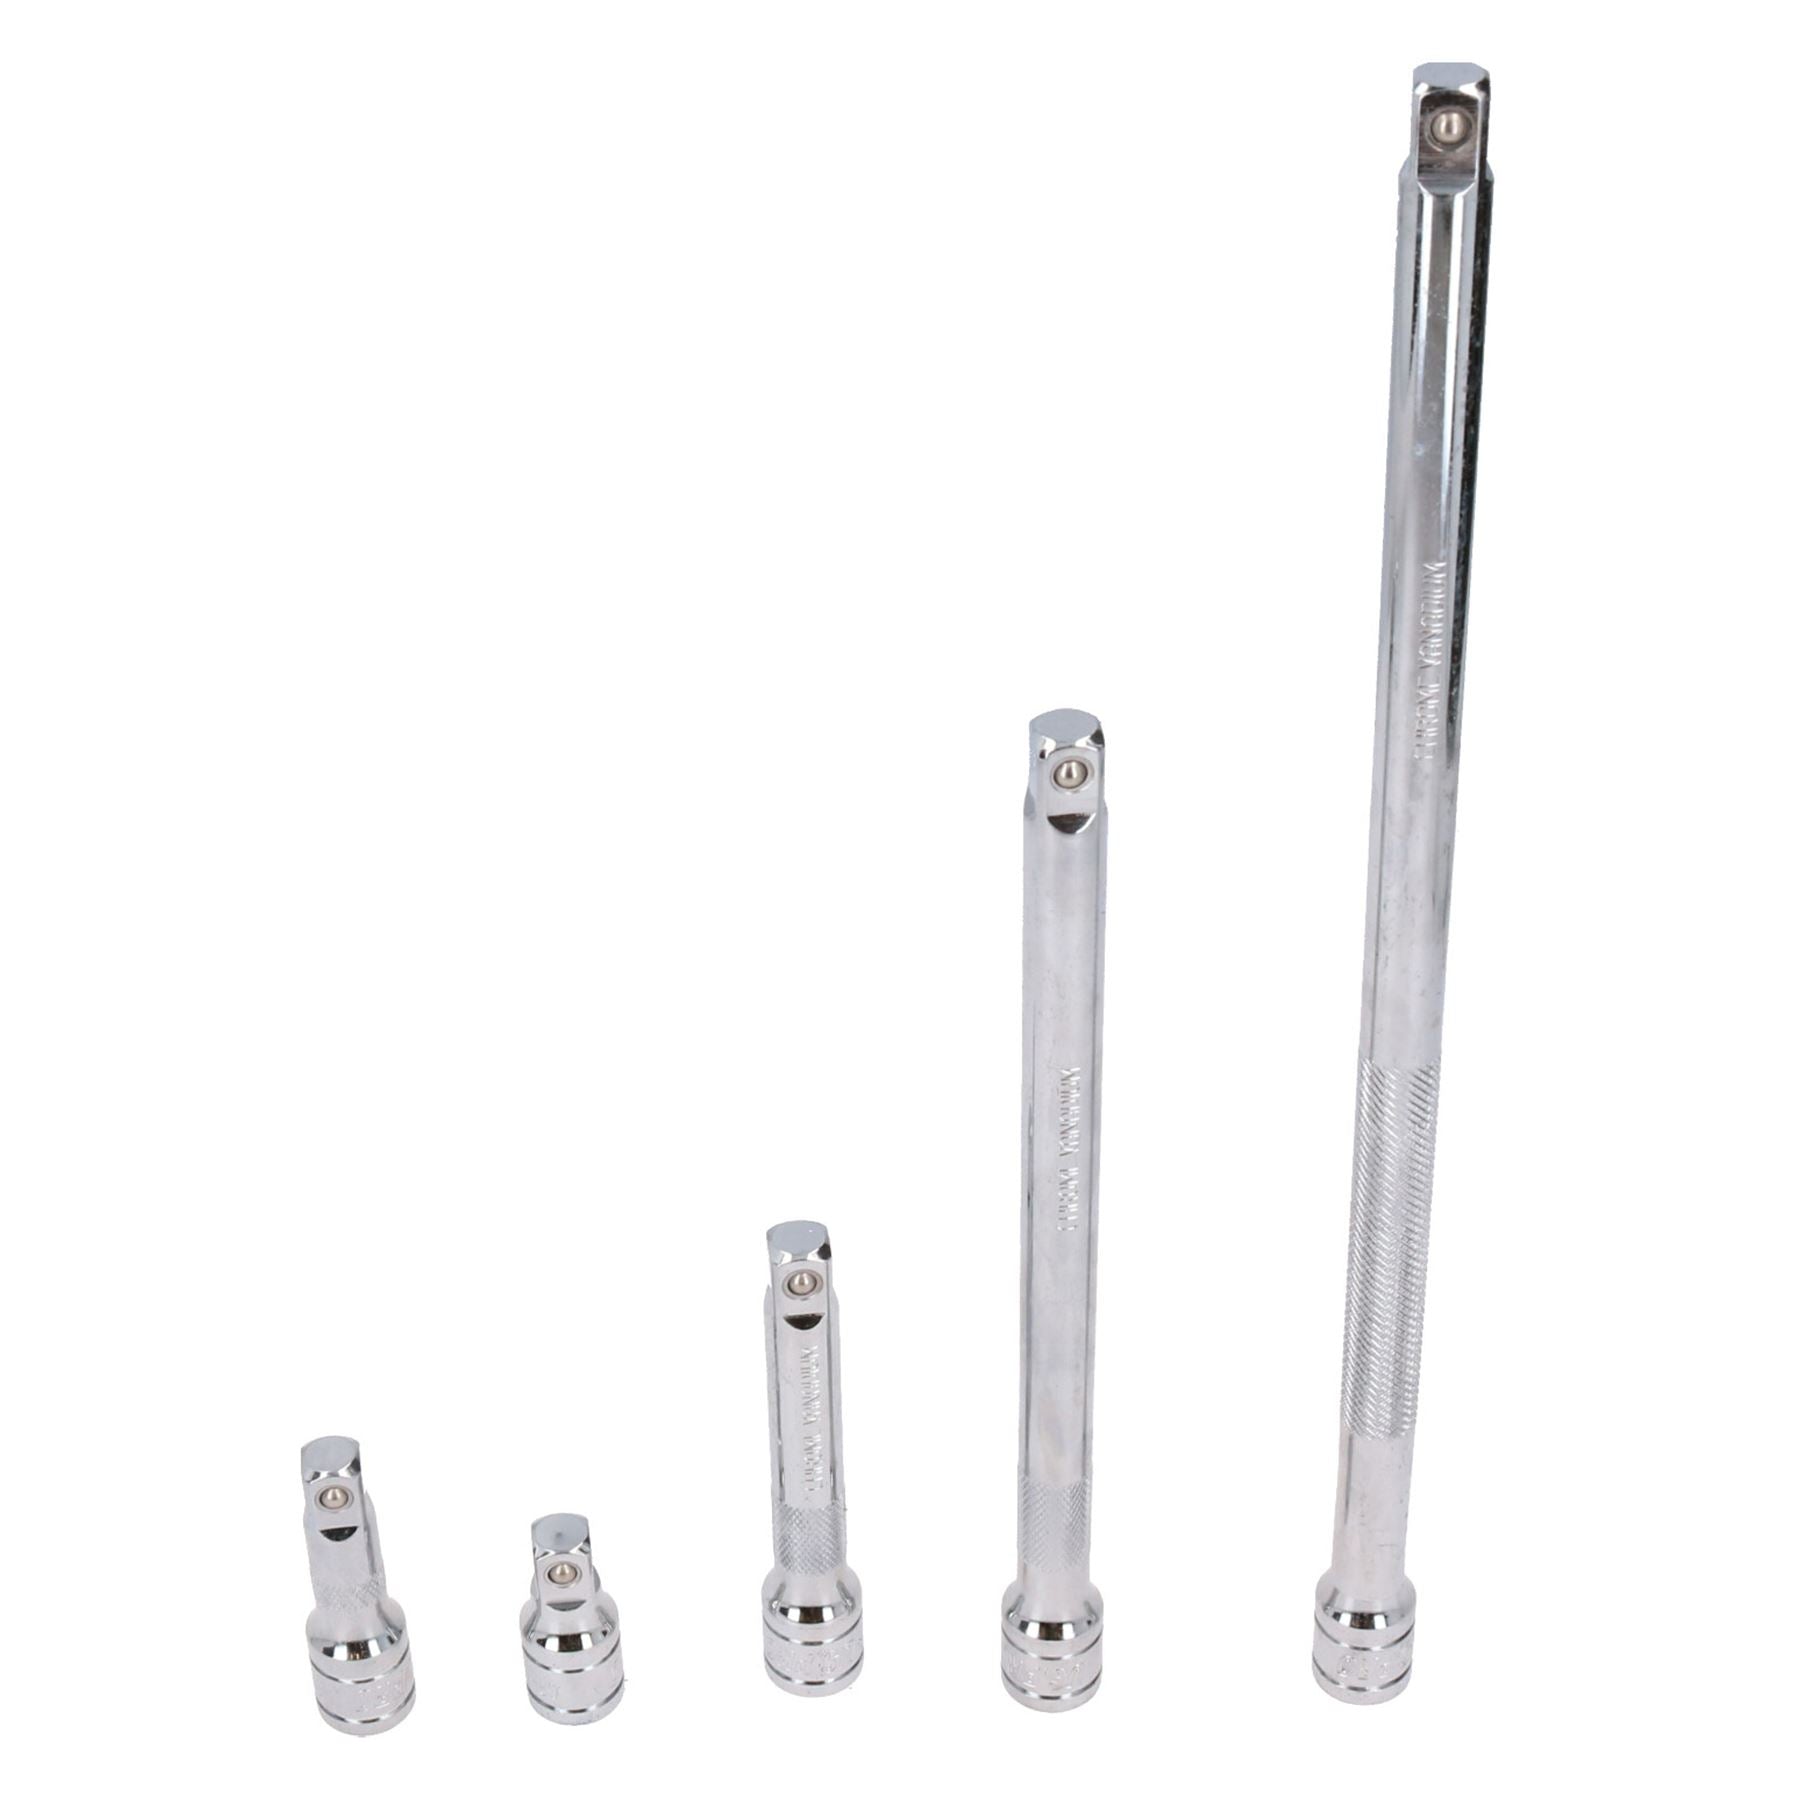 1/2" drive extension bar set 50mm - 375mm 5PC by BERGEN AT104